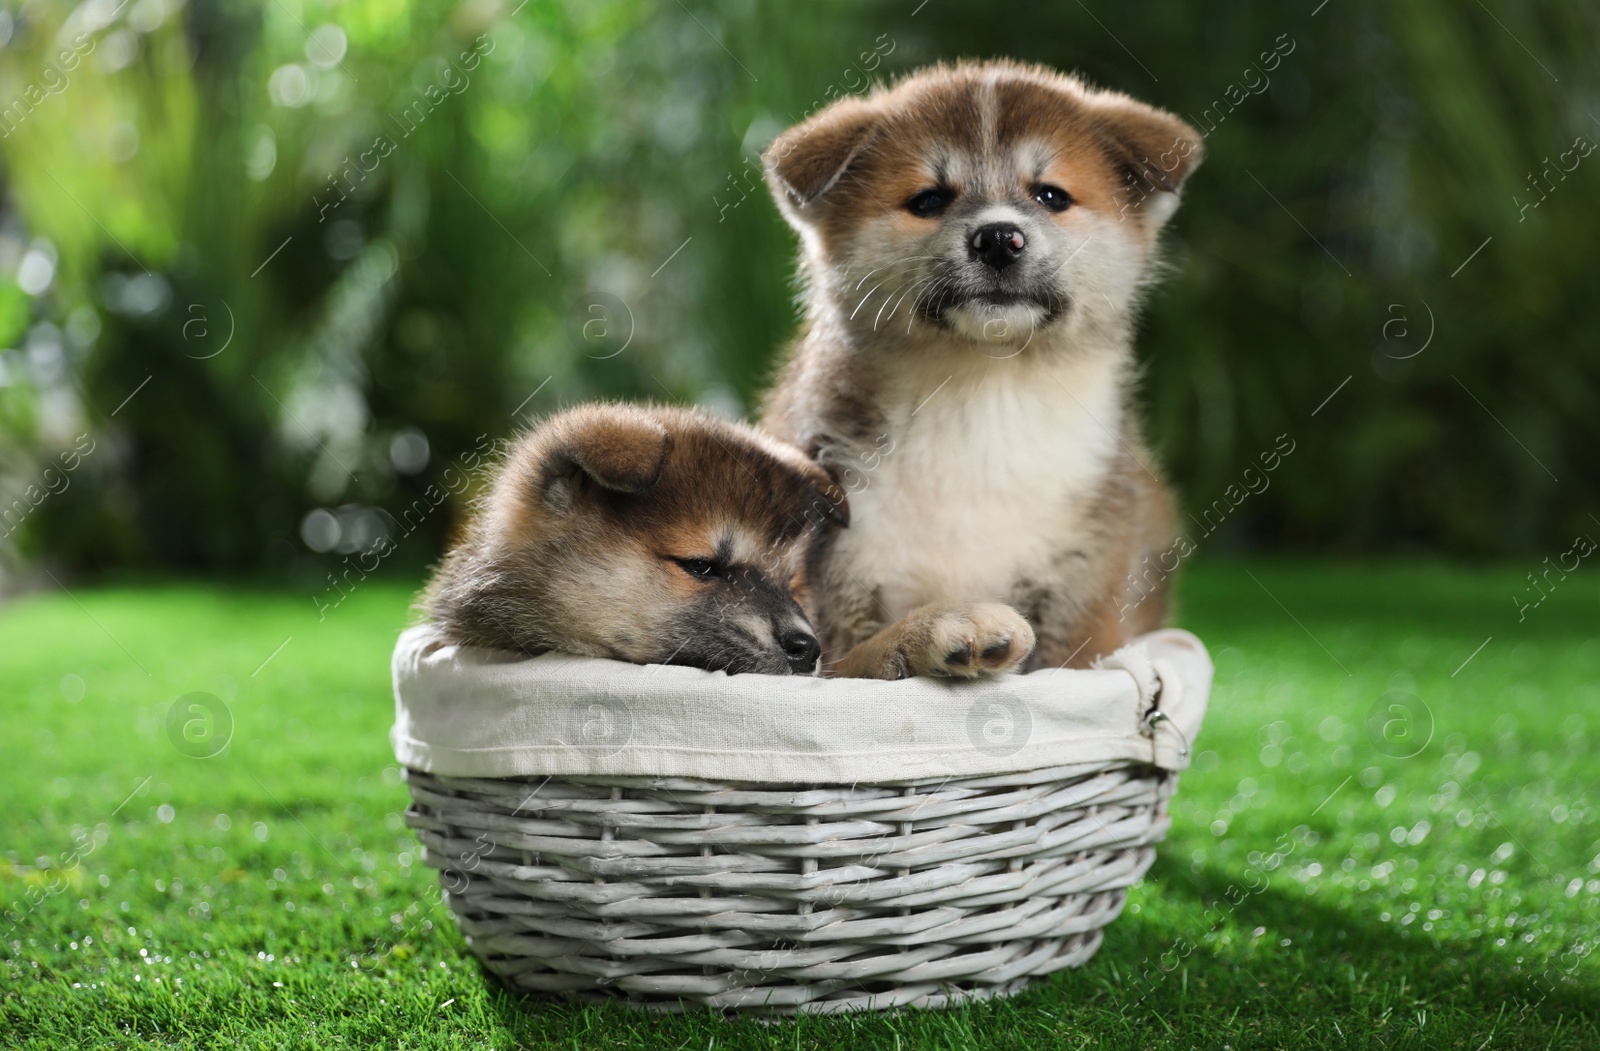 Photo of Cute Akita Inu puppies in wicker basket on green grass outdoors